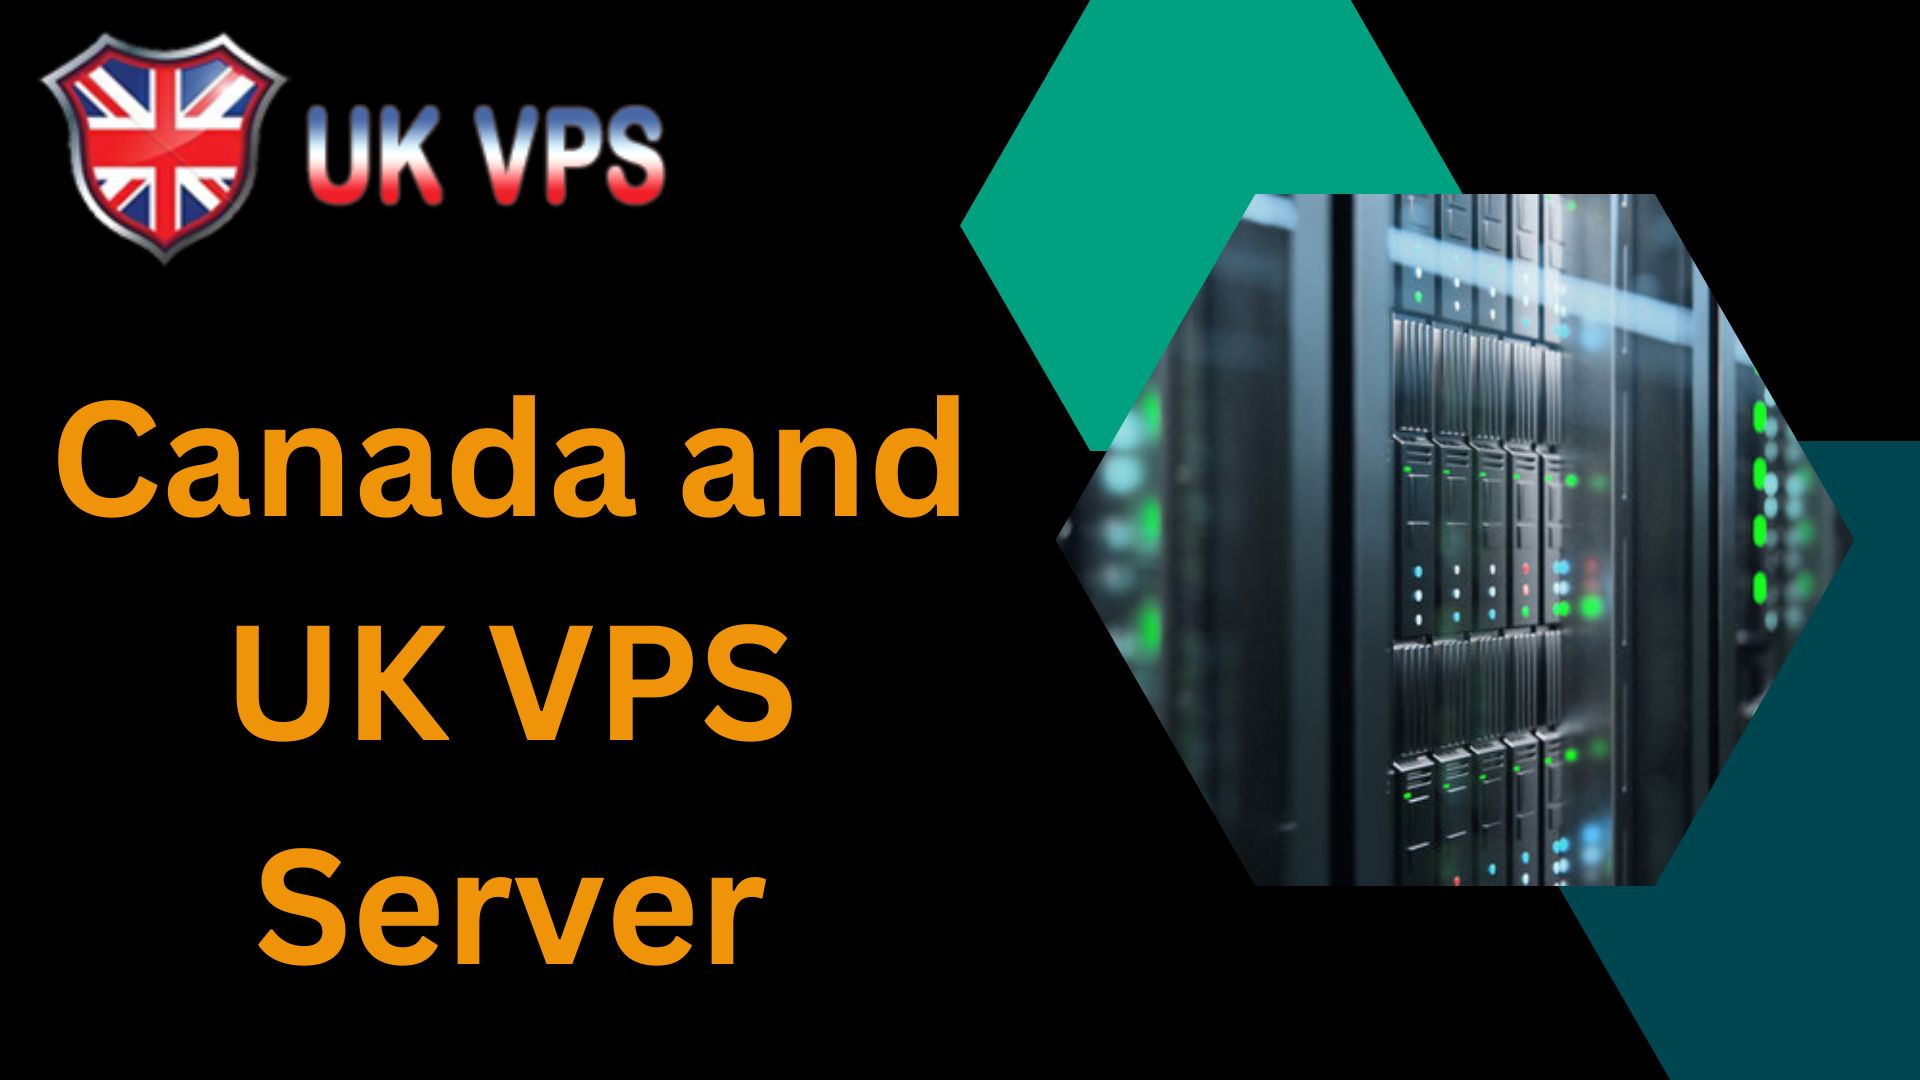 Canada and UK VPS Server